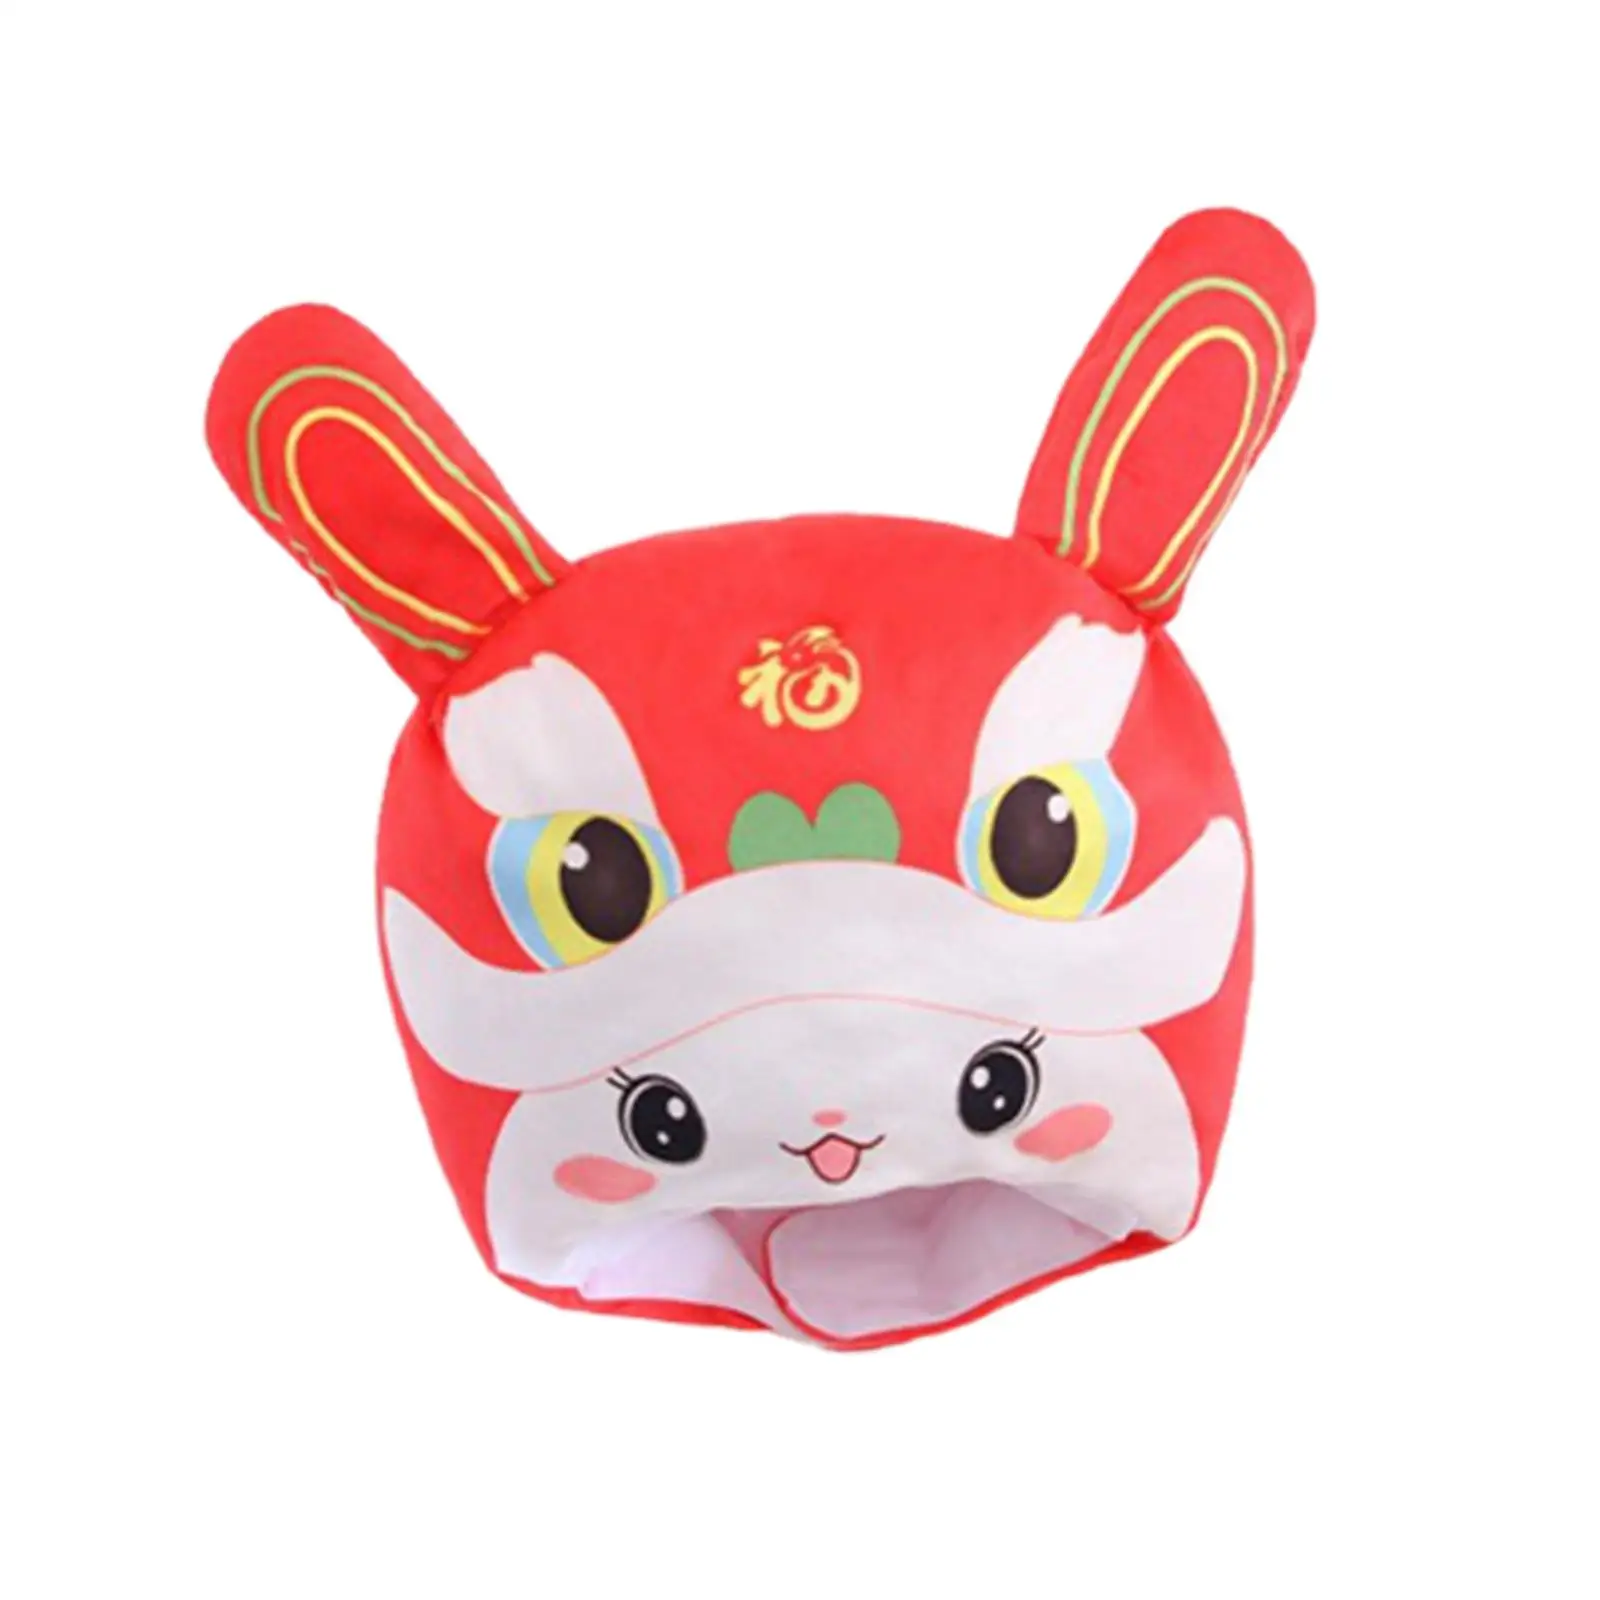 Funny Lion Rabbit Plush Hat Unisex Novelty Animal Hat Headwear Holiday Decorations Comfortable Warm for Dress Cosplay New Year